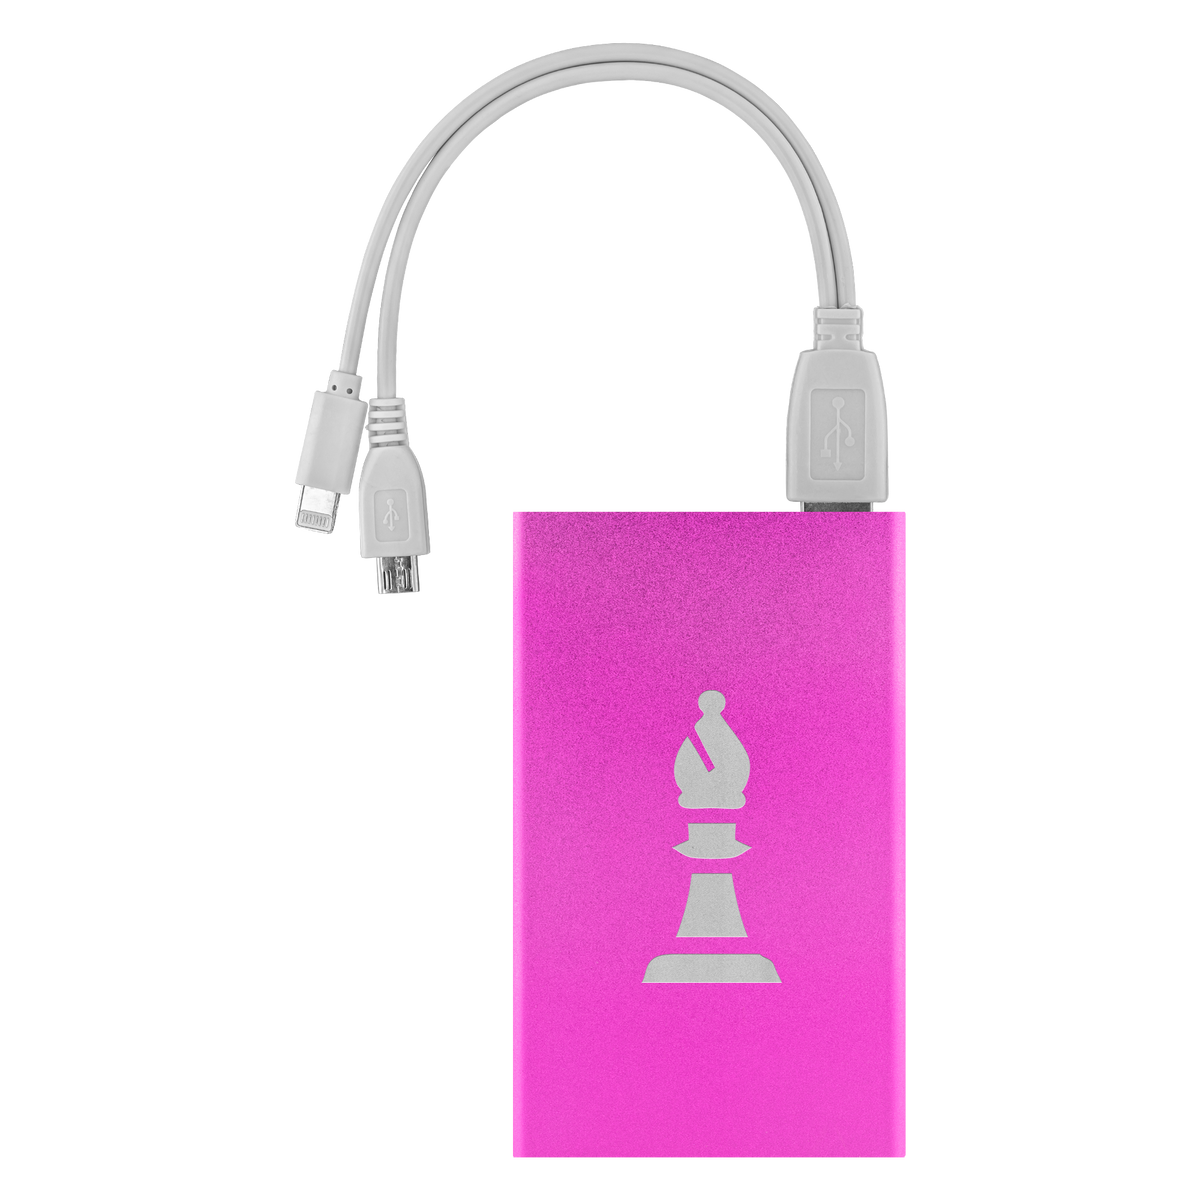 Chess Bishop laser etched Lithium-Ion power bank